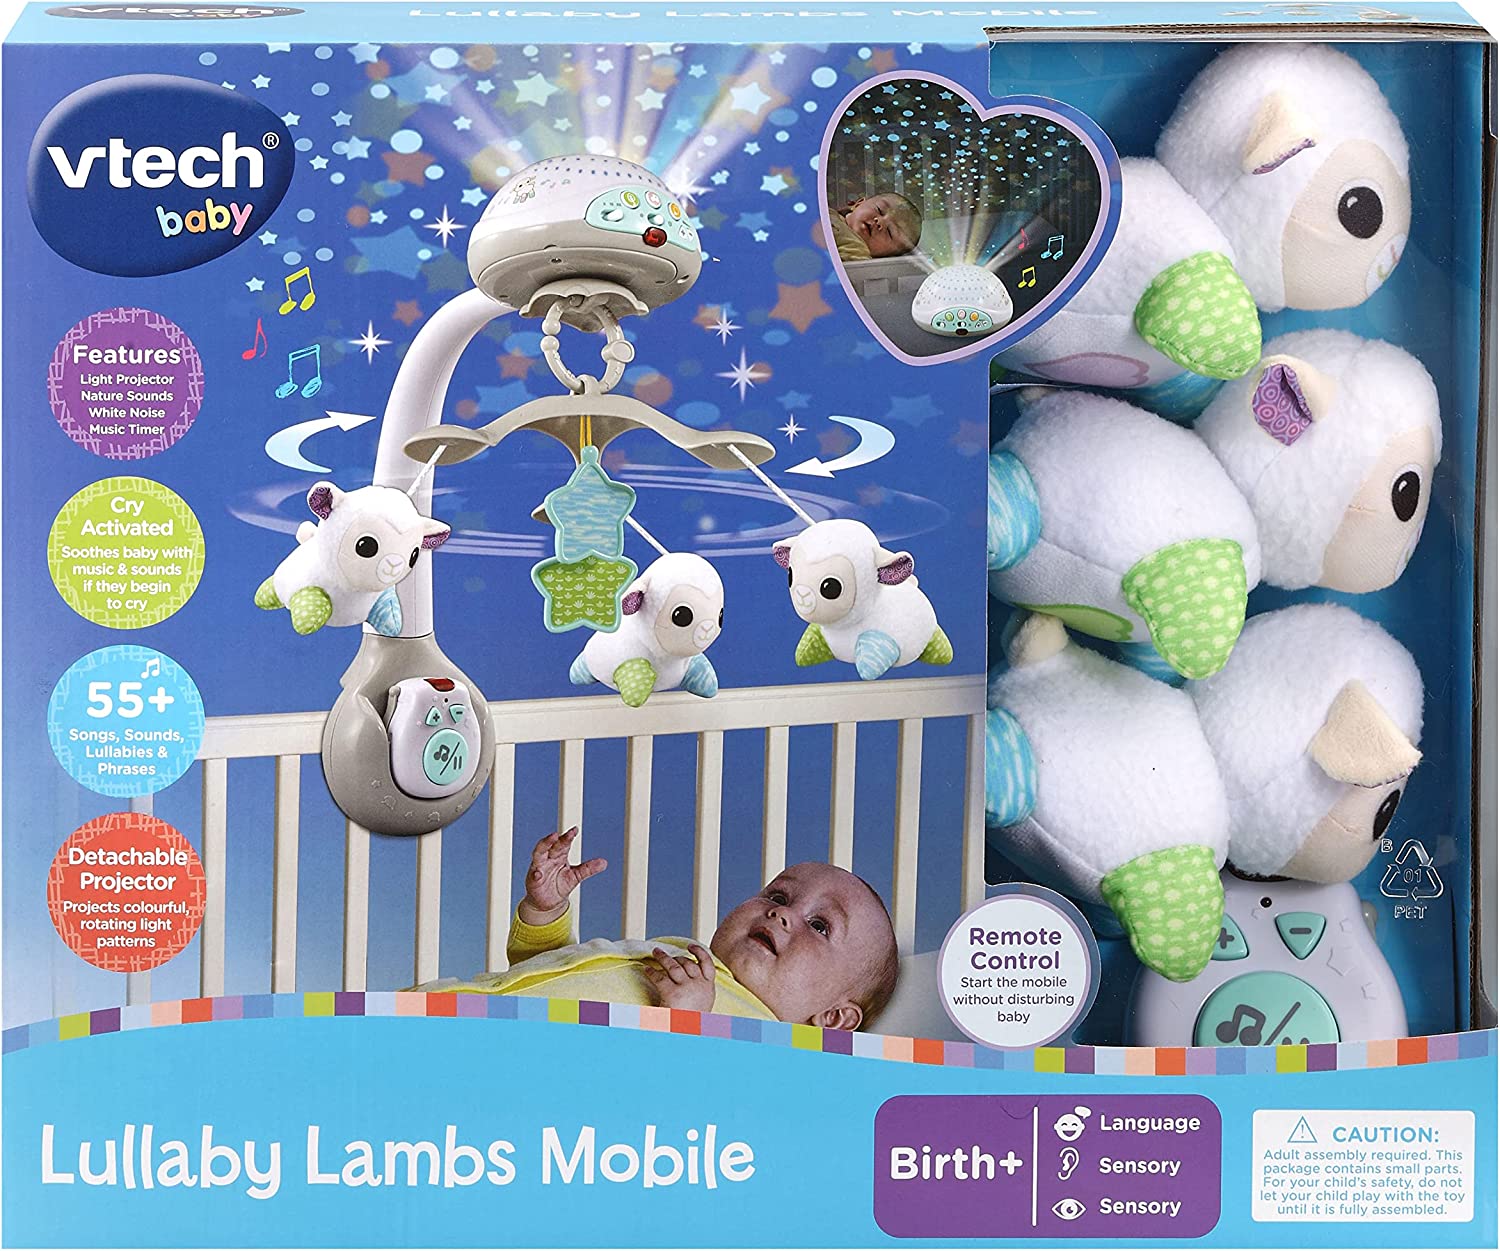 VTECH BABY LULLABY LAMBS MOBILE